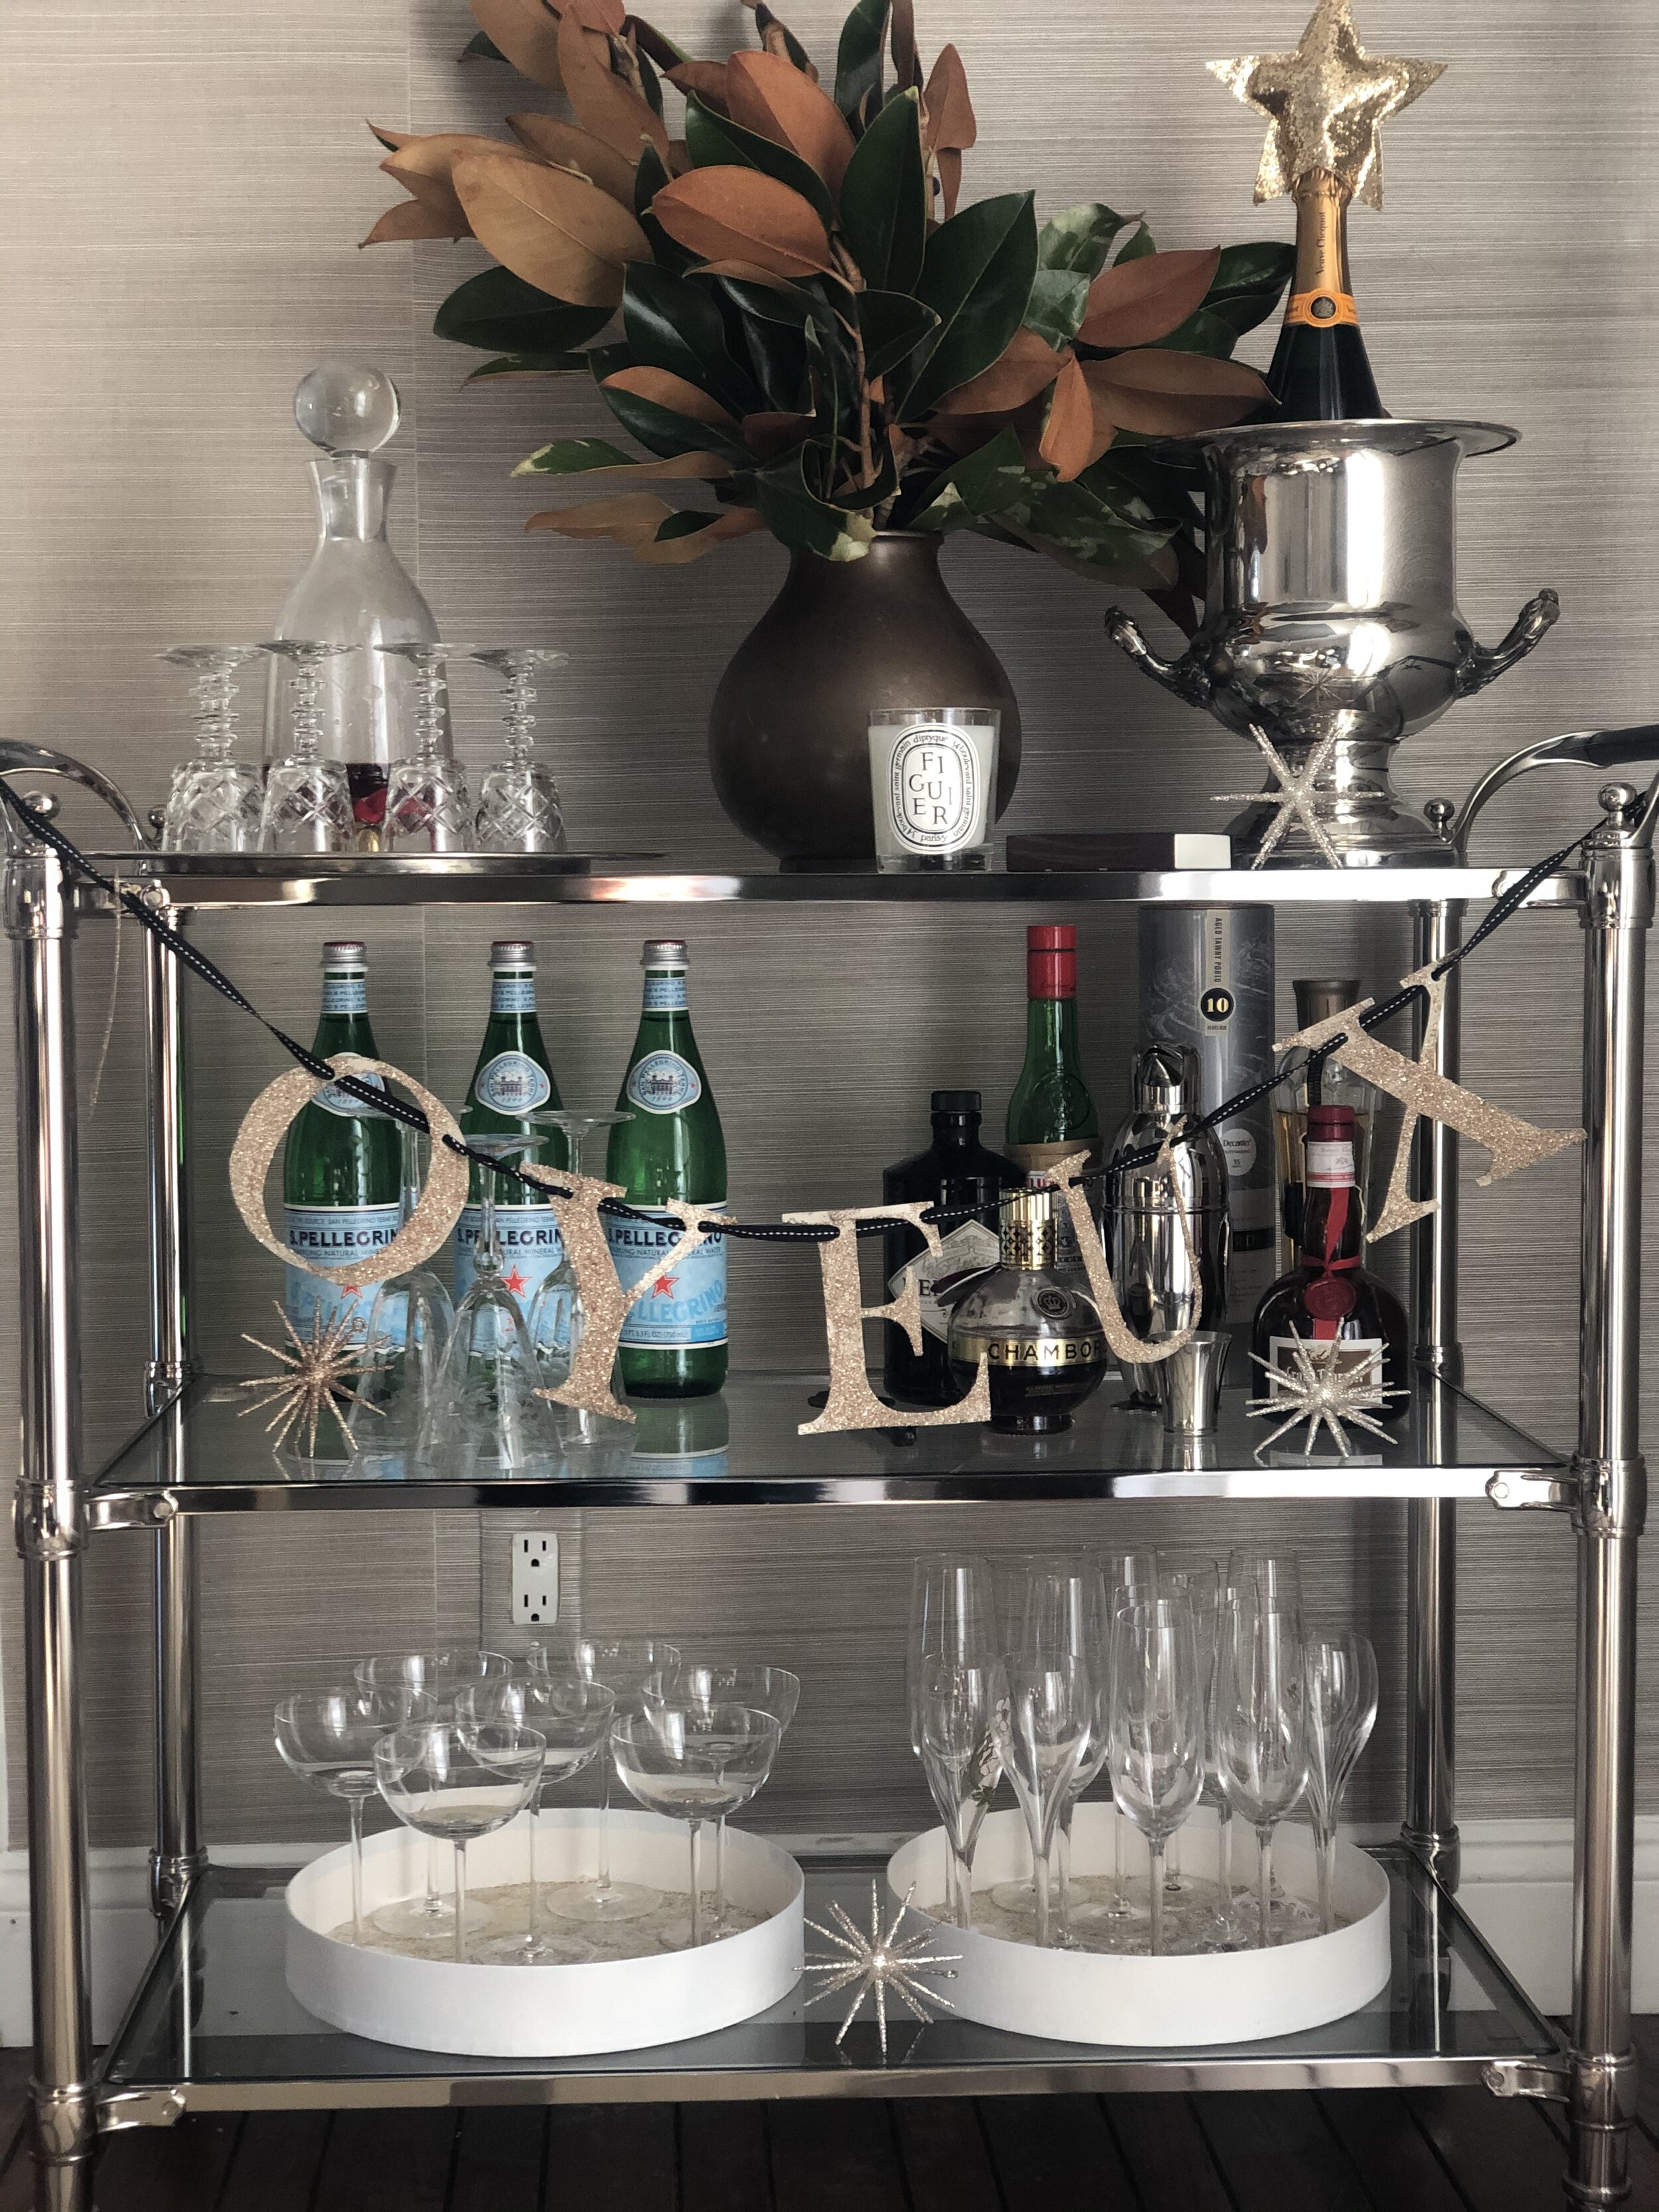 The centerpiece of the holidays: the bar cart